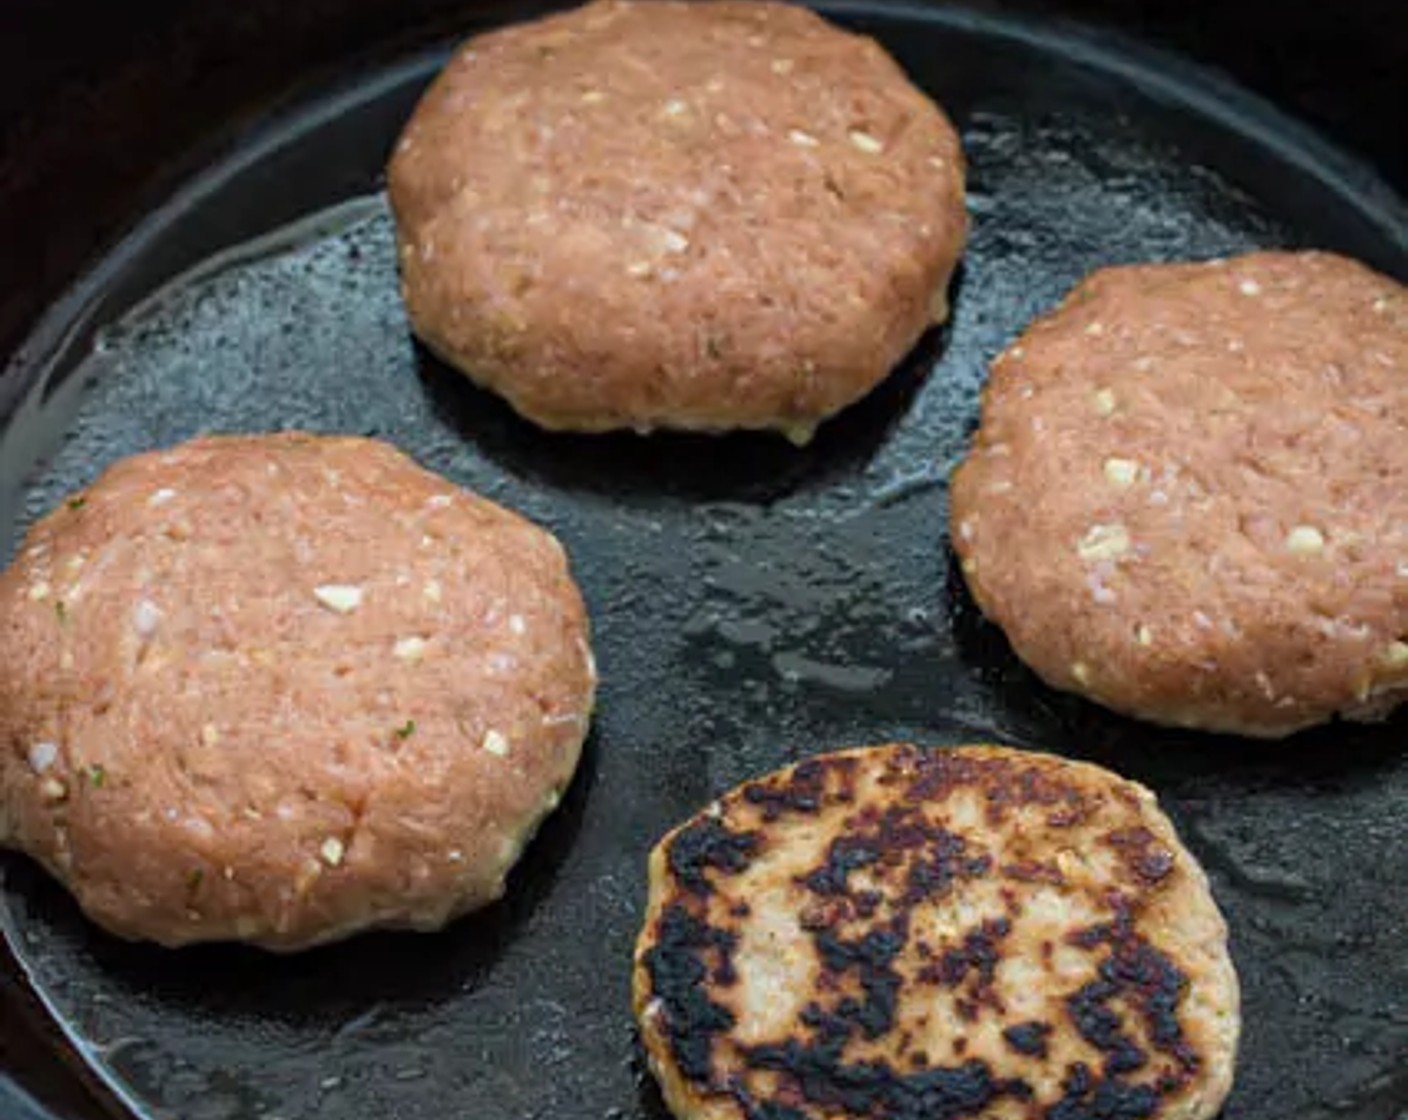 step 4 Flip them over and sear for another 2-3 minutes. Remove the burger patties from the skillet and set them aside.